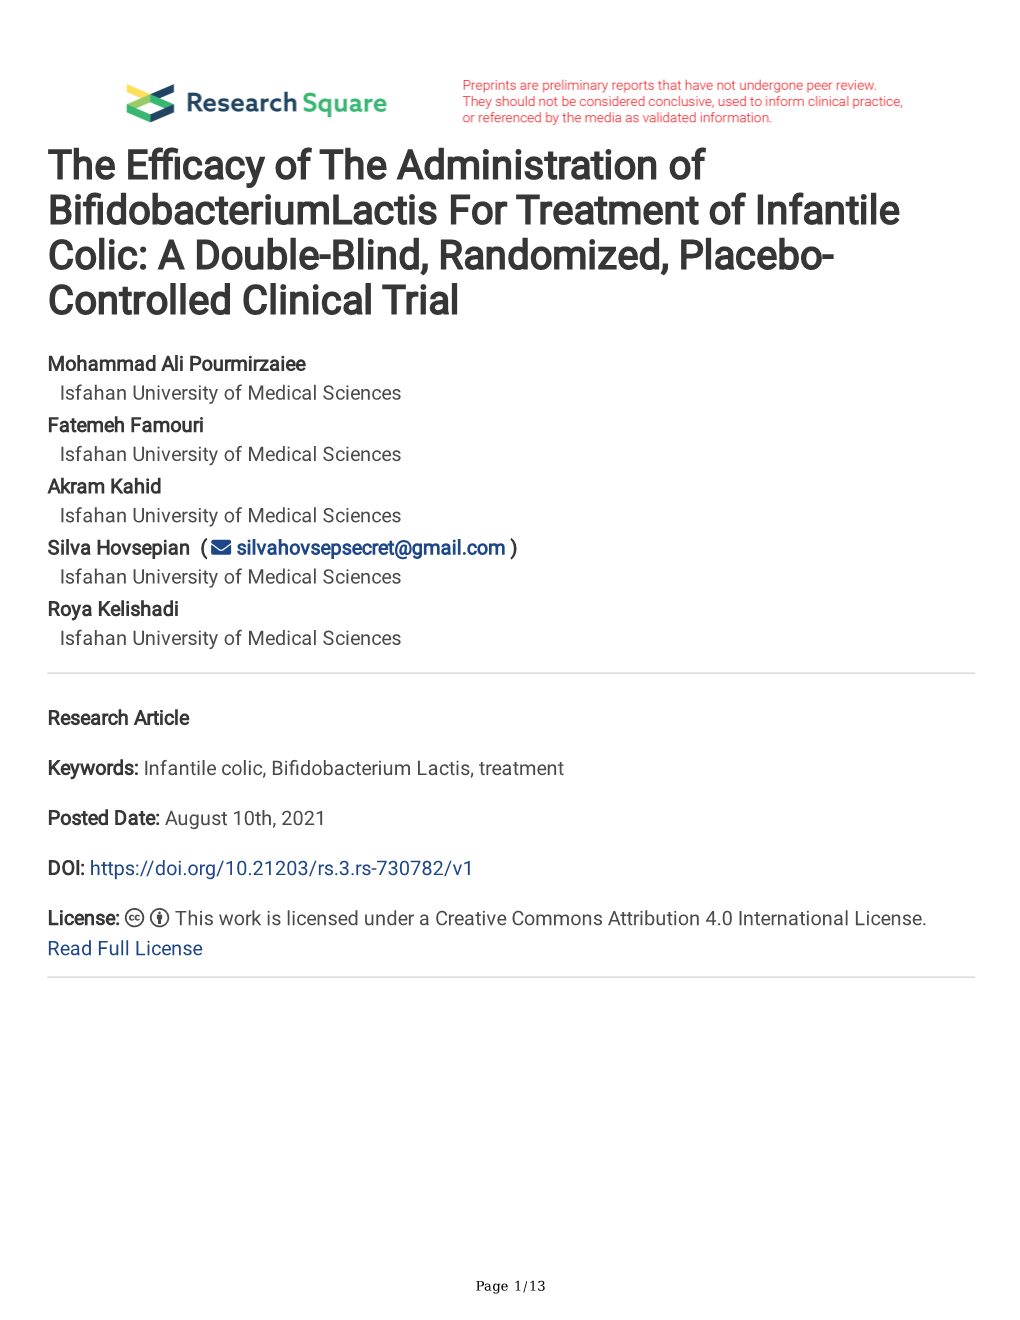 The E Cacy of the Administration of Bi Dobacteriumlactis for Treatment Of